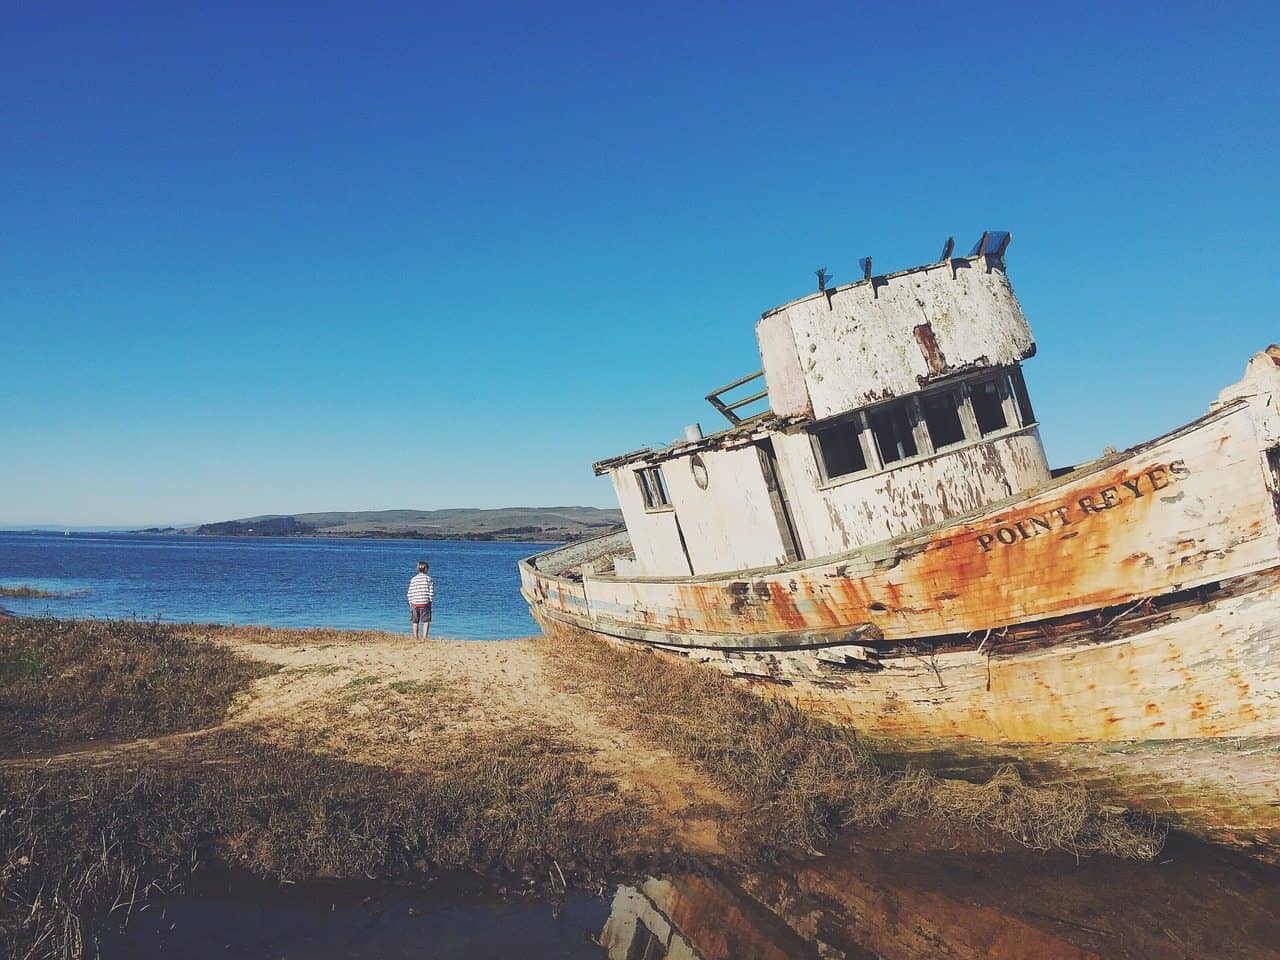 Explore Point Reyes Shipwreck On The Perfect Northern California Road Trip Itinerary